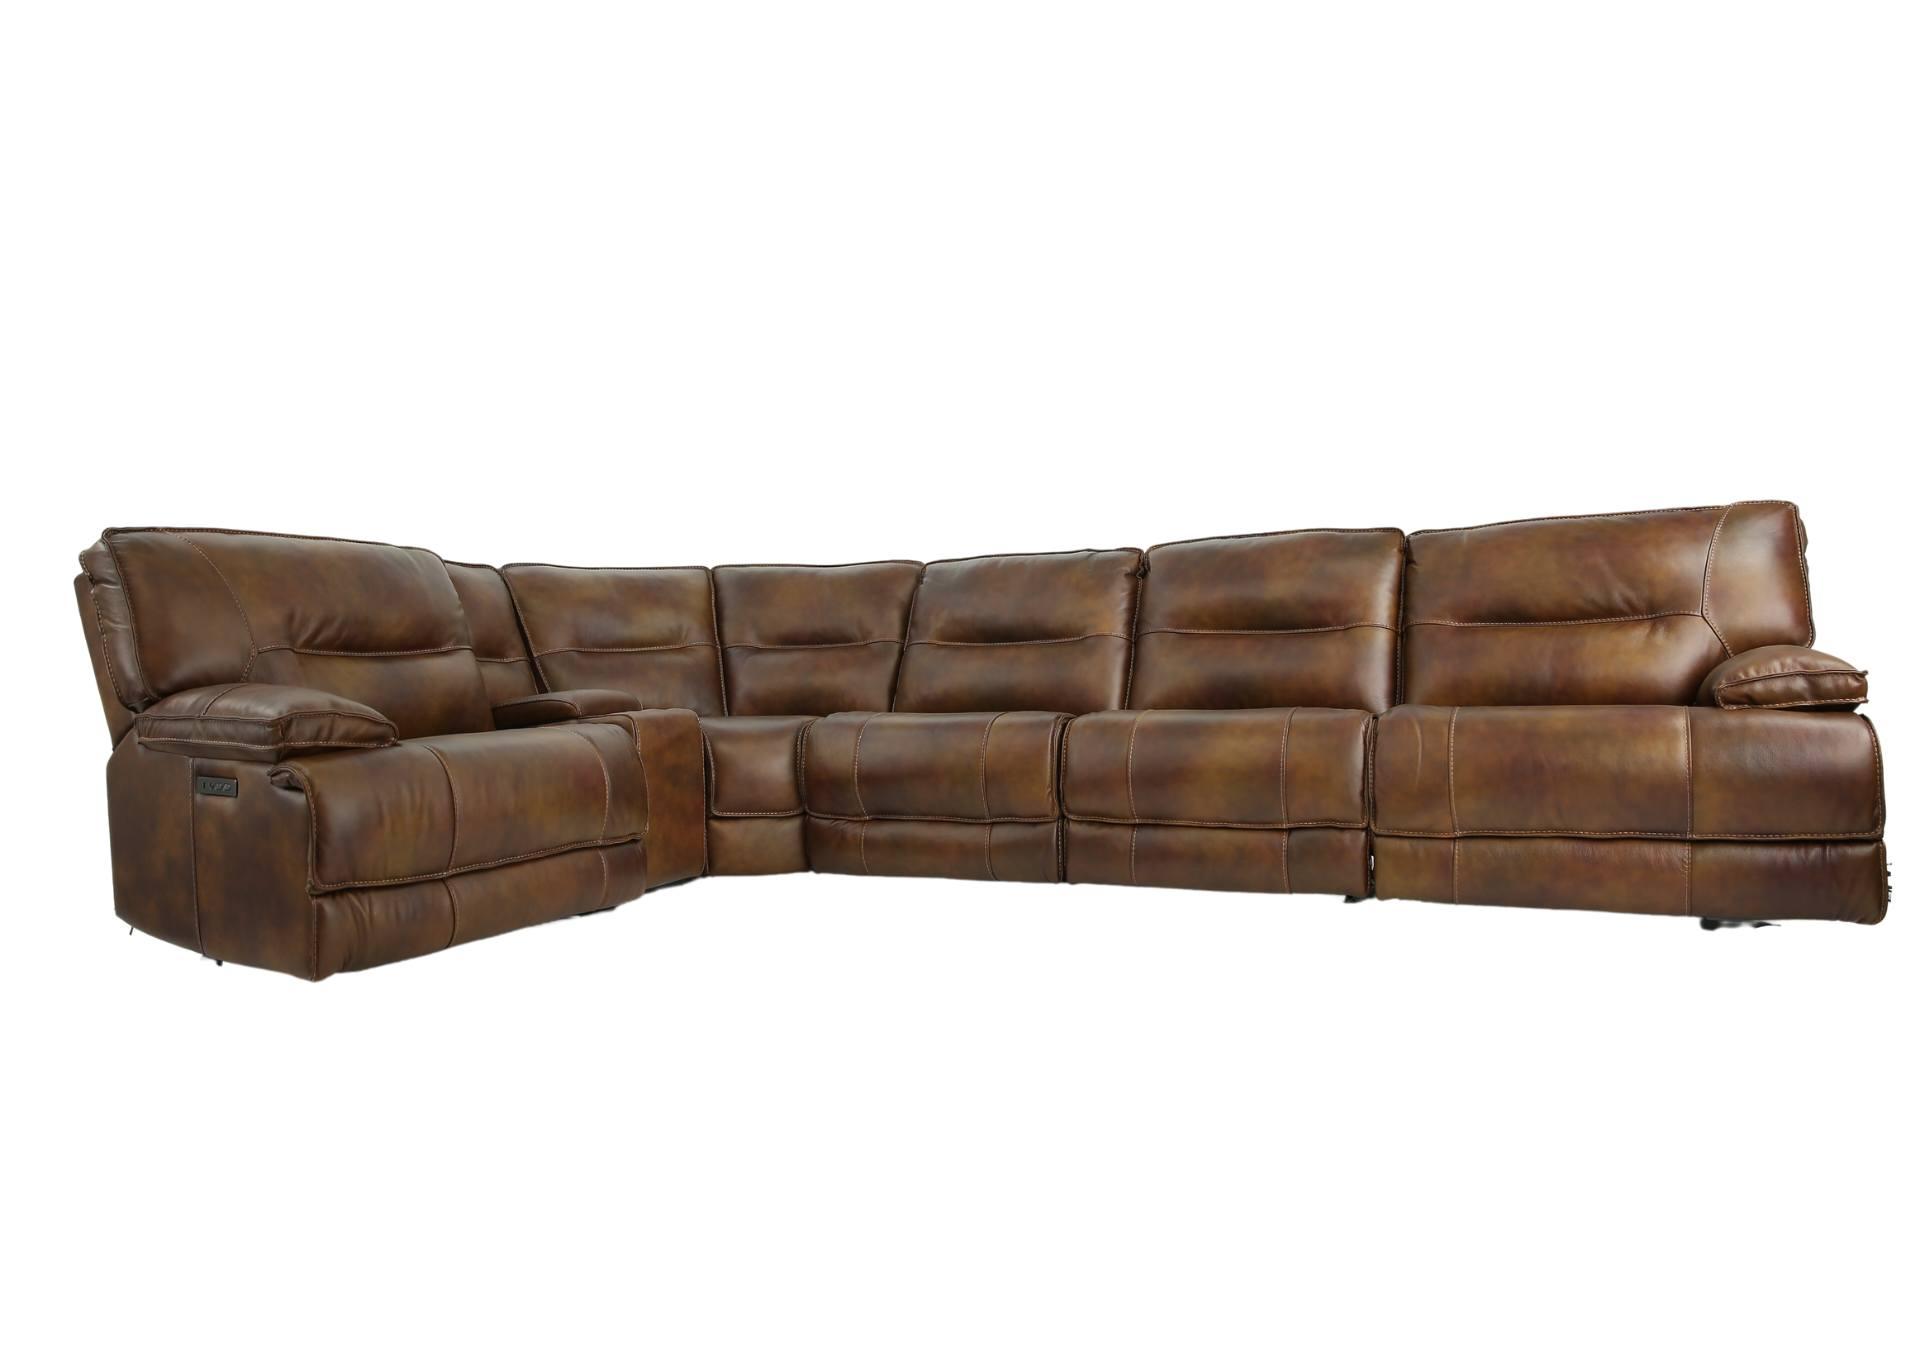 HENDRIX SIENNA LEATHER 2P POWER 6 PIECE SECTIONAL